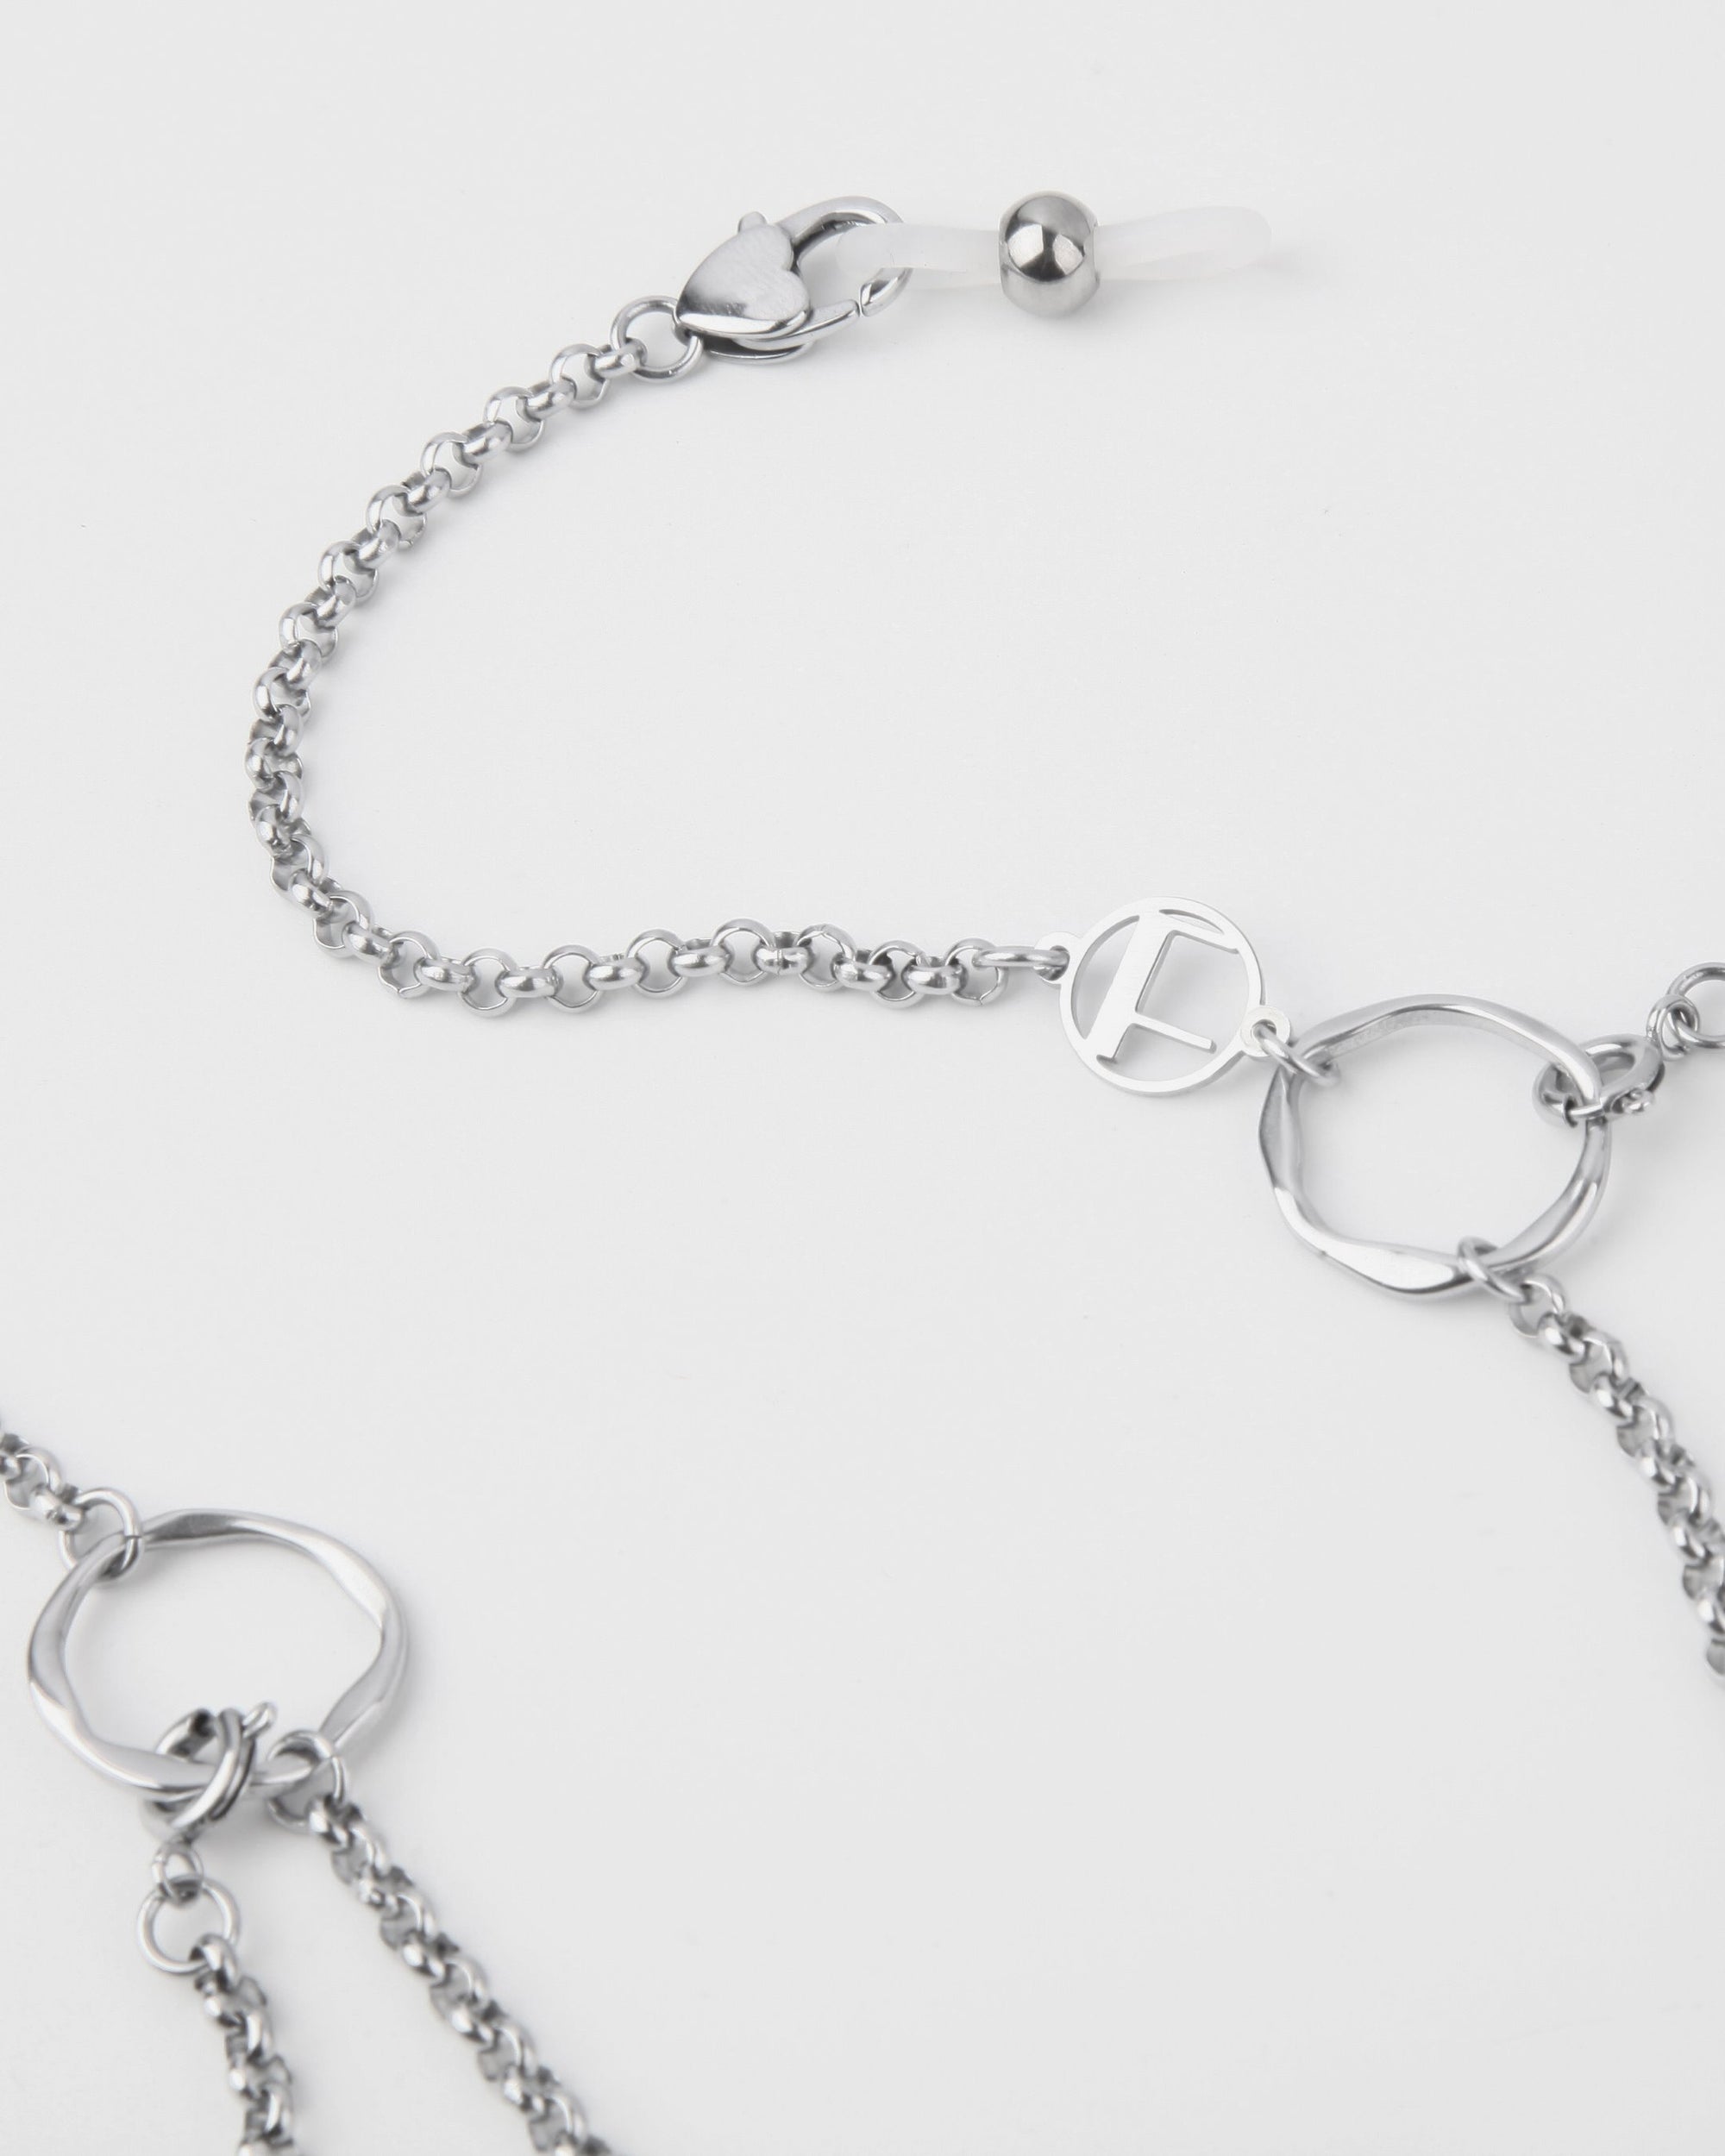 A close-up image of a For Art's Sake® Florentina Glasses Chain featuring various circular links, crafted from palladium-plated stainless steel. The glasses chain includes a decorative pendant with a stylized letter "F" and a clasp adorned with a small heart-shaped charm. The background is a clean white.